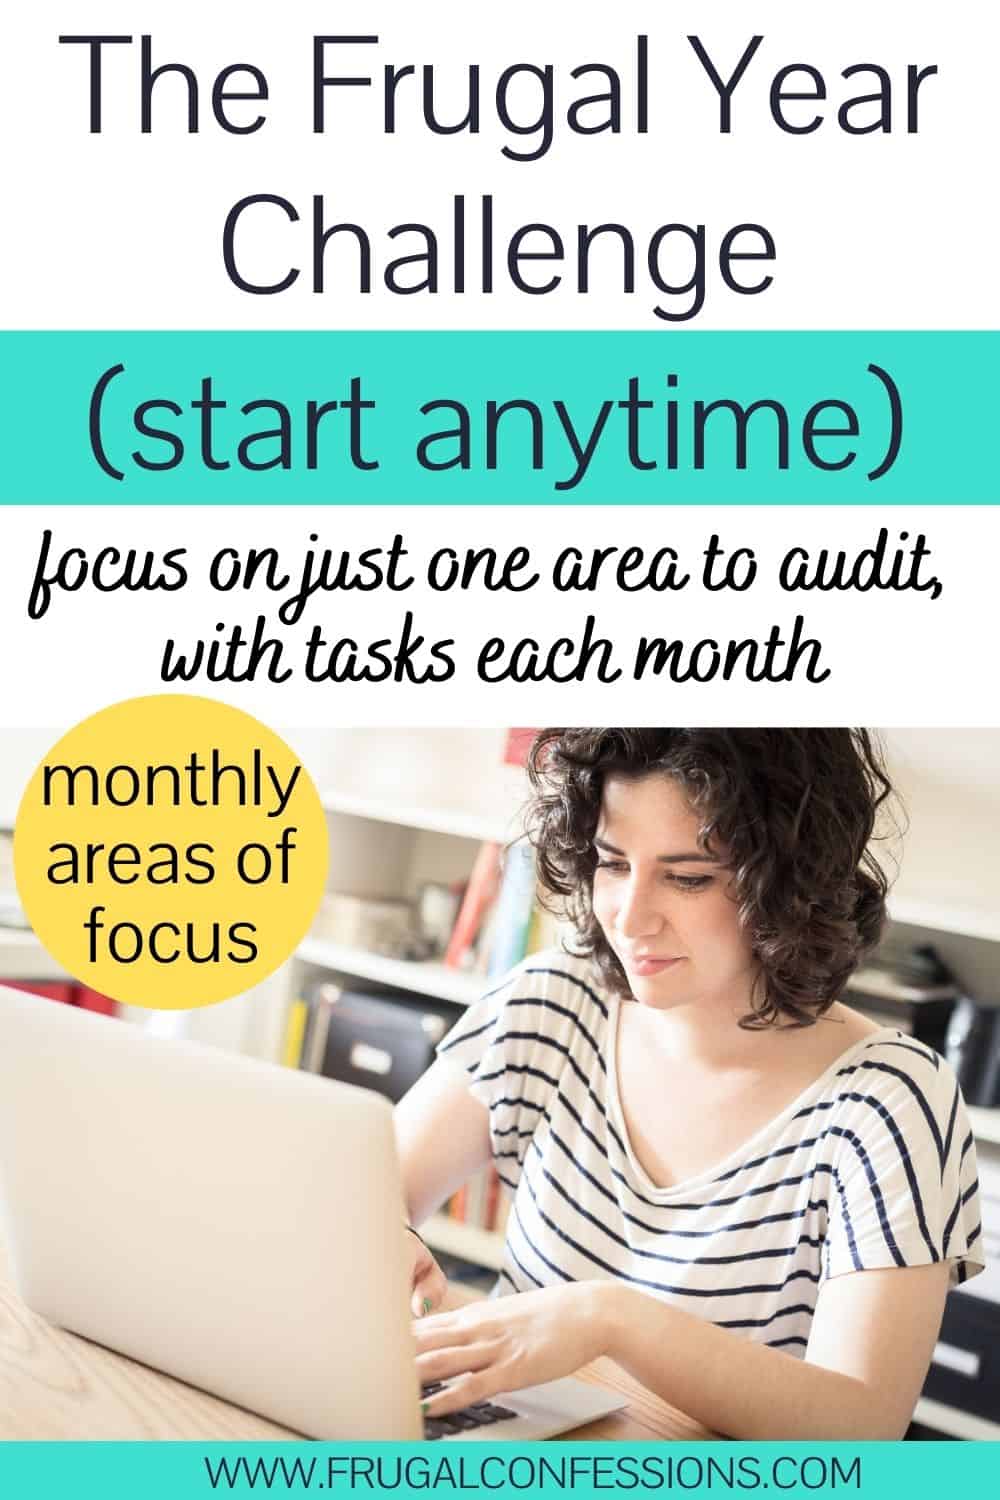 woman in striped shirt smiling on laptop, text overlay "the frugal year challenge - start anytime"